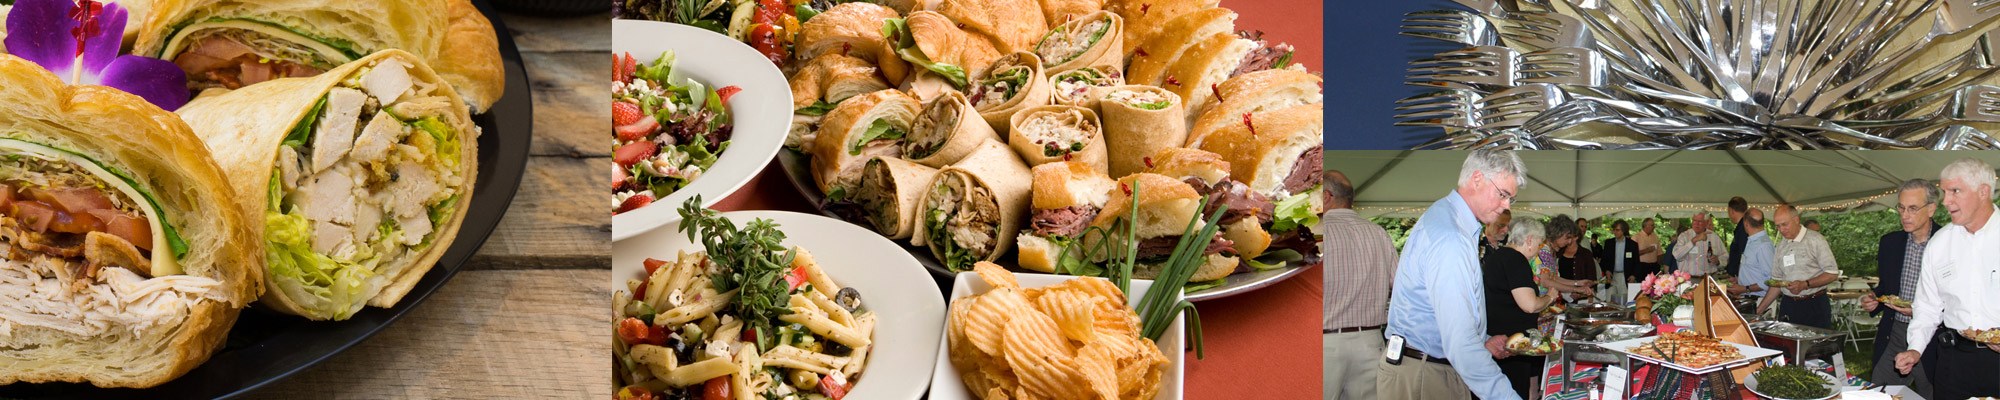 Main and Market Catering